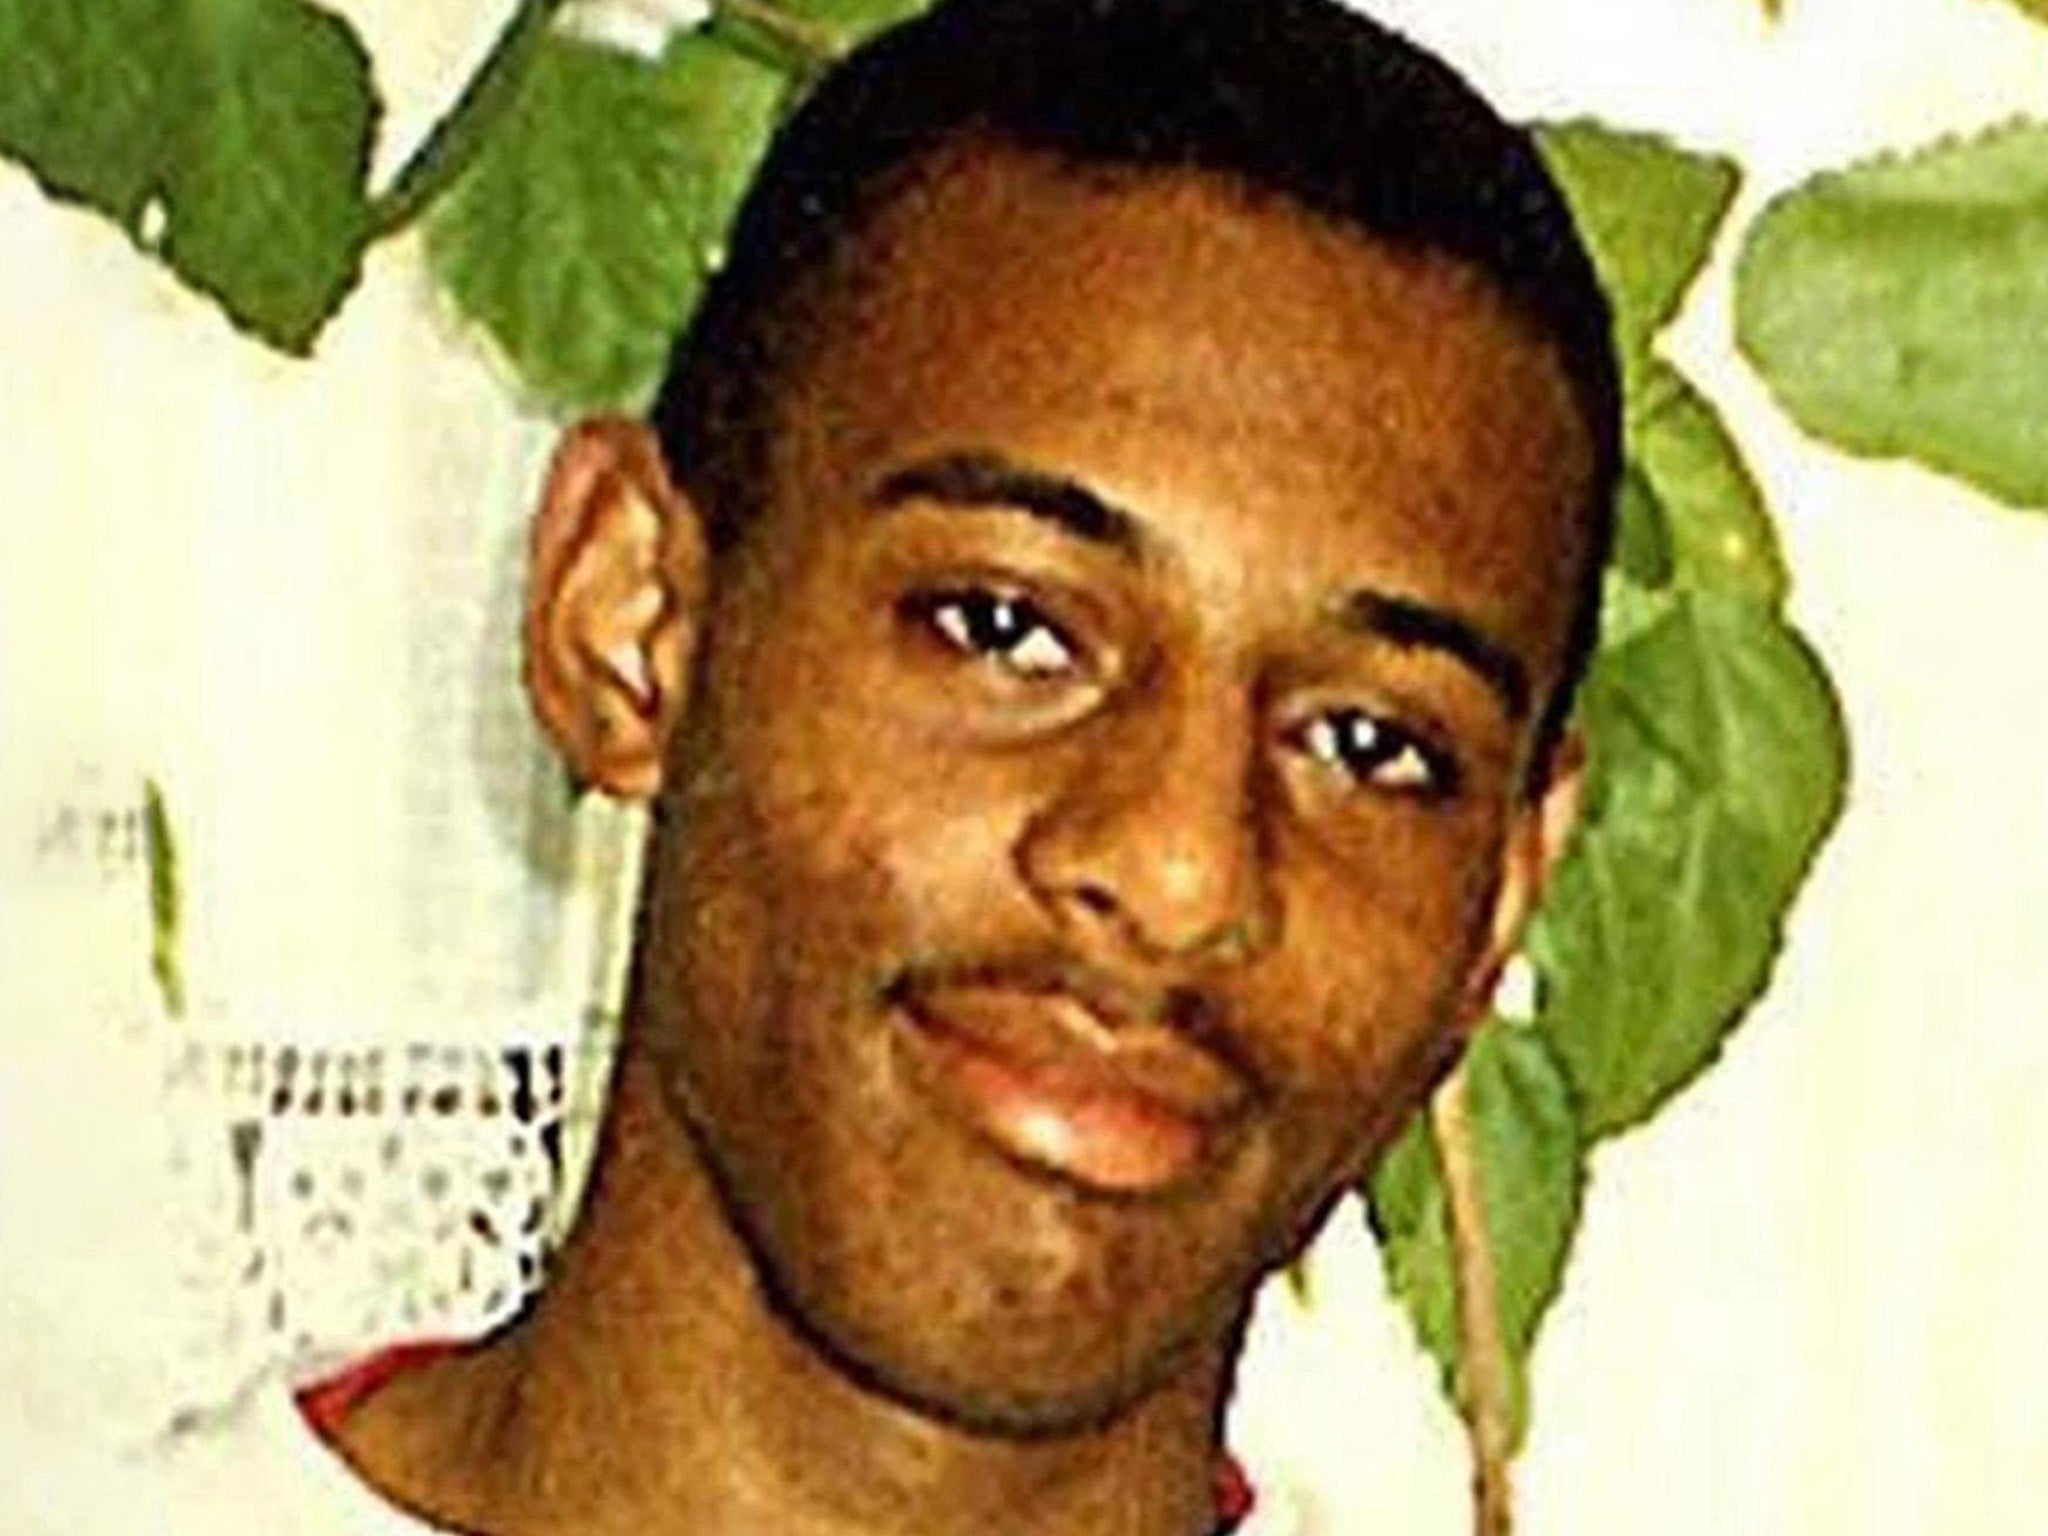 Police spied on justice campaigns including that for murdered teenager Stephen Lawrence